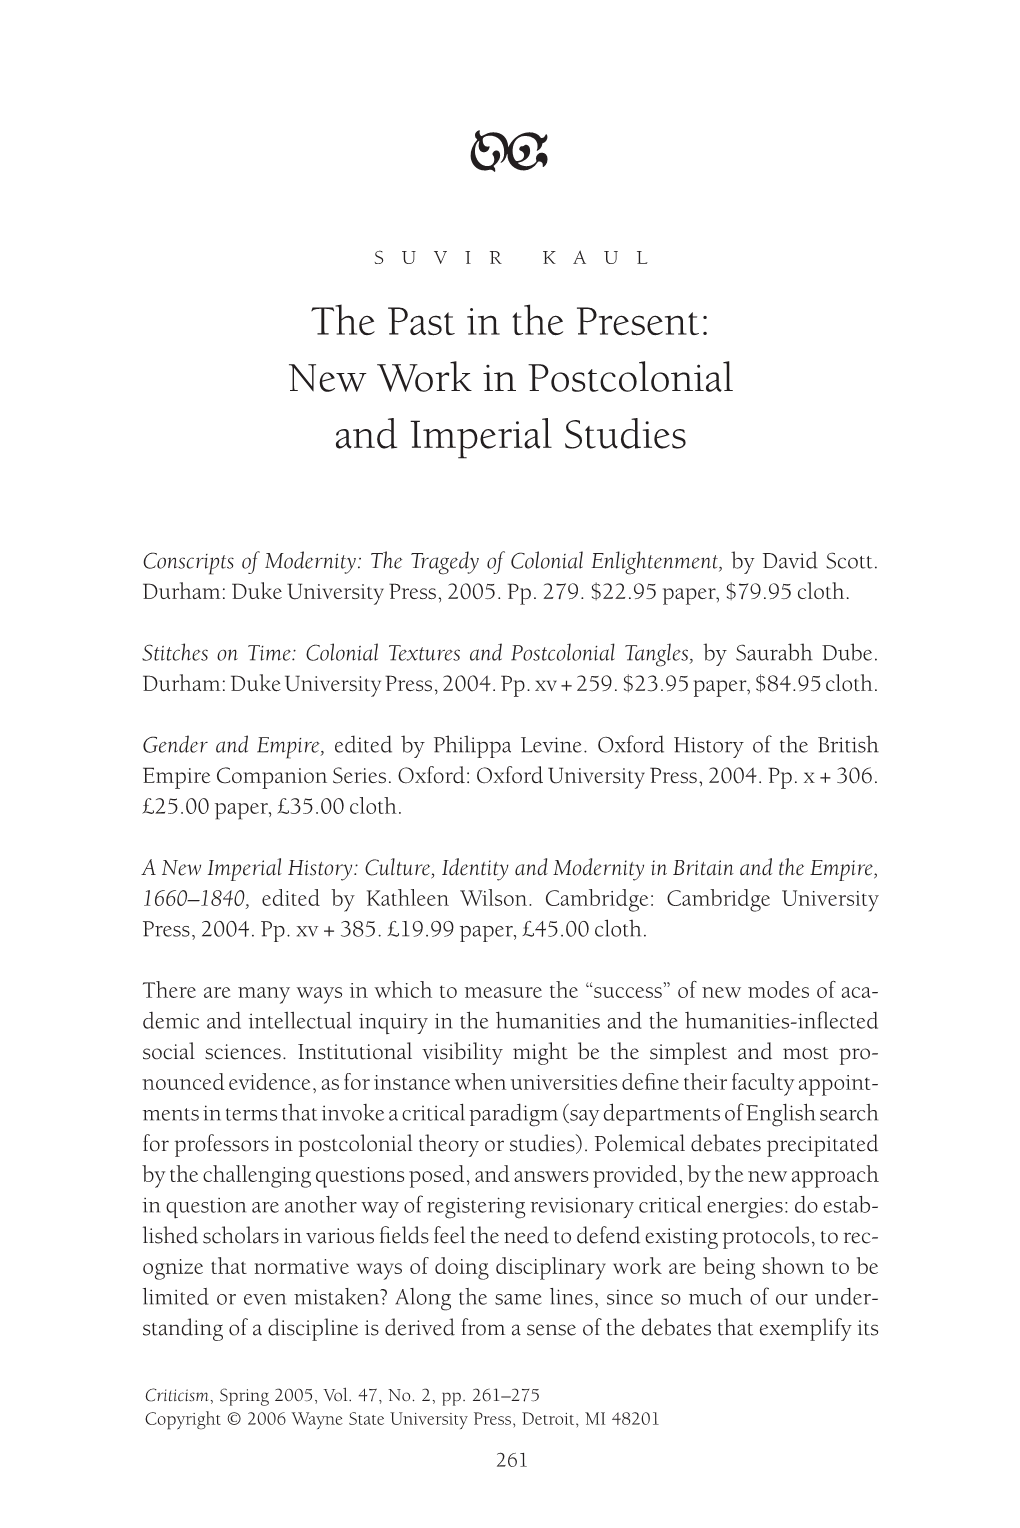 New Work in Postcolonial and Imperial Studies